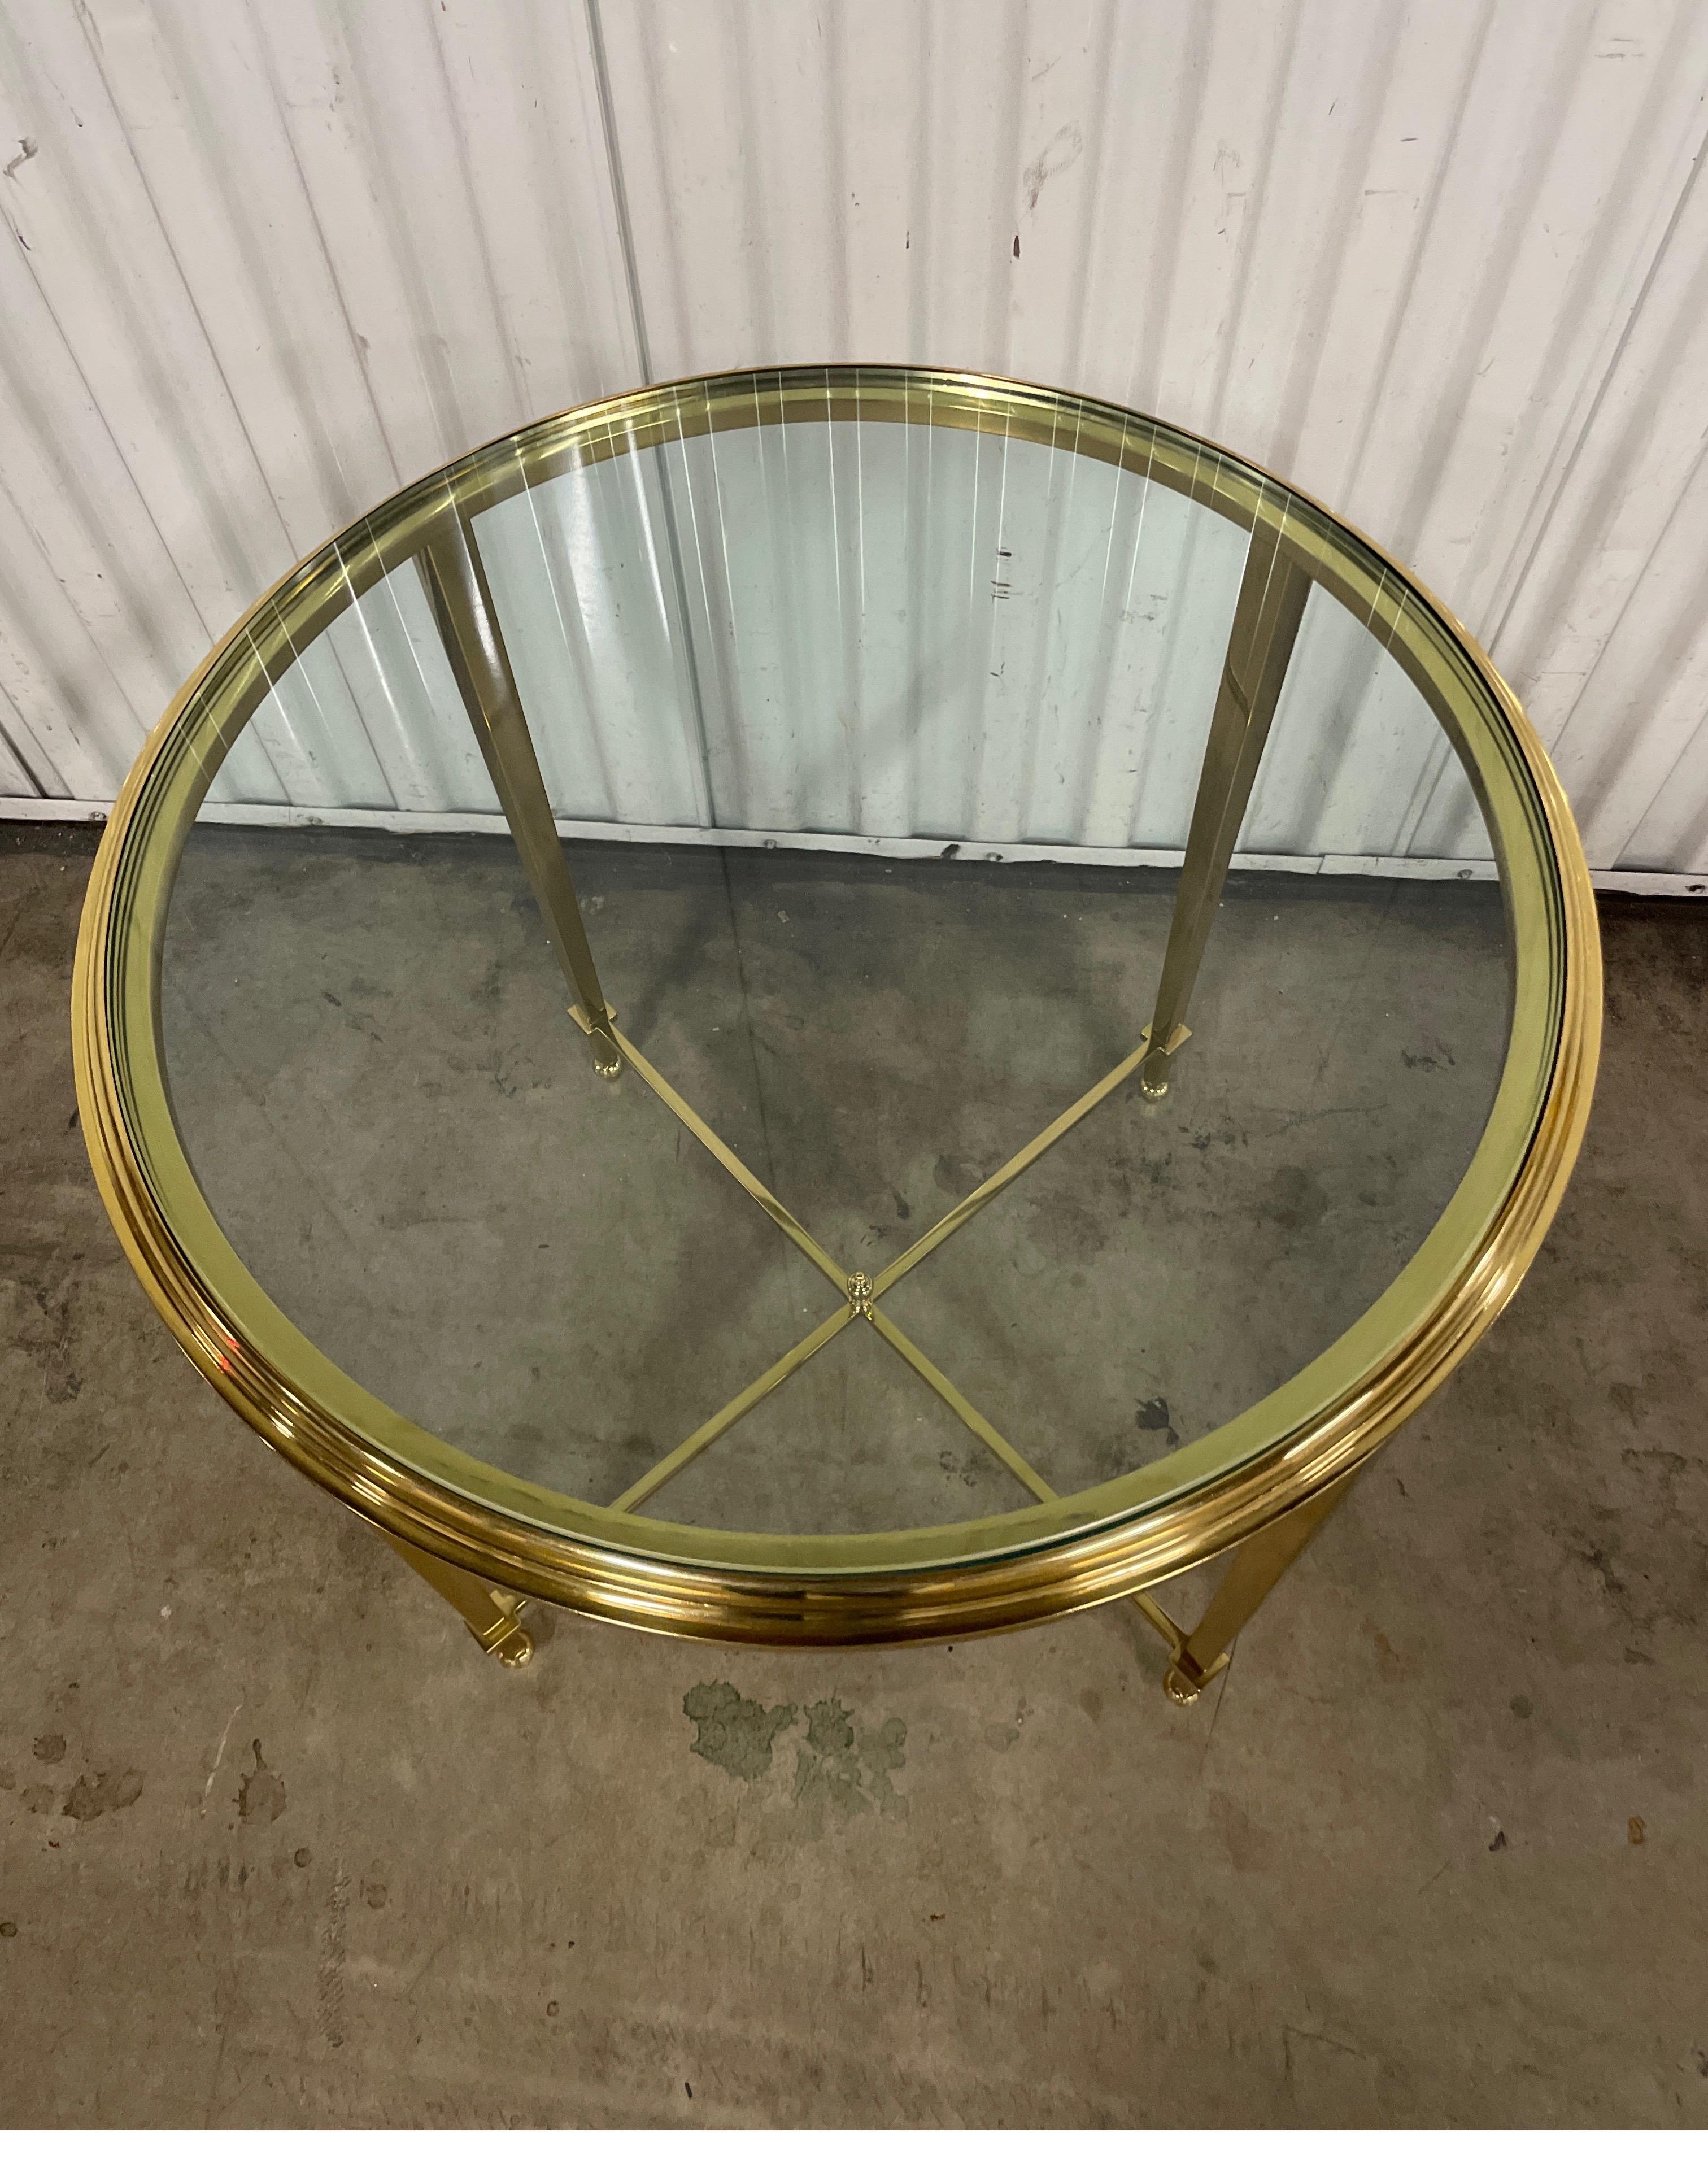 Vintage solid brass round side table with glass top by Jansen. The four legs are attached at bottom with an X stretcher and center finial. A very simple and elegant small drinks table.